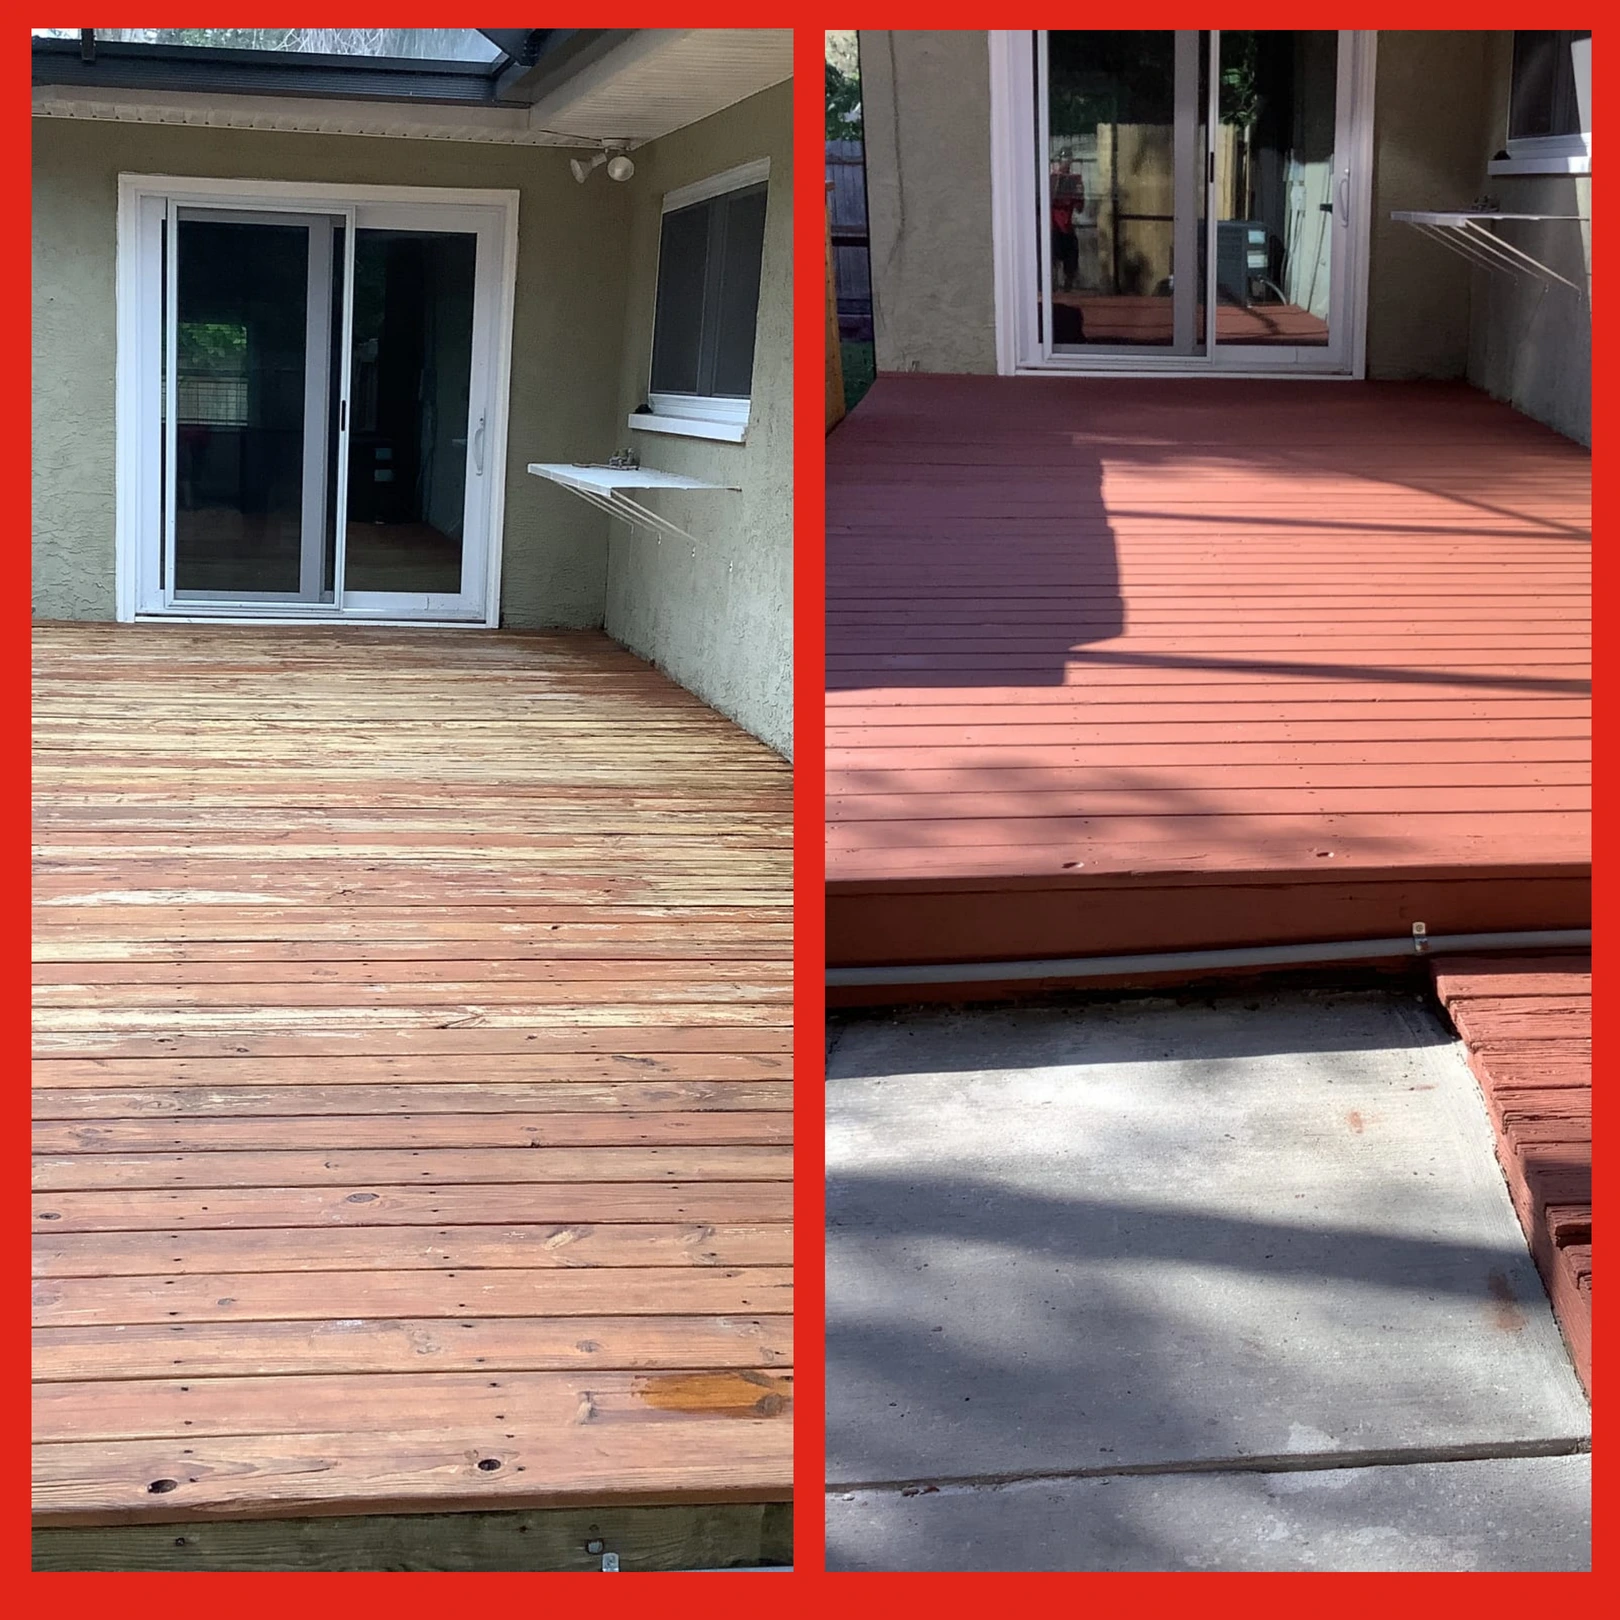  A deck before and after it has been refinished by Mr. Handyman.